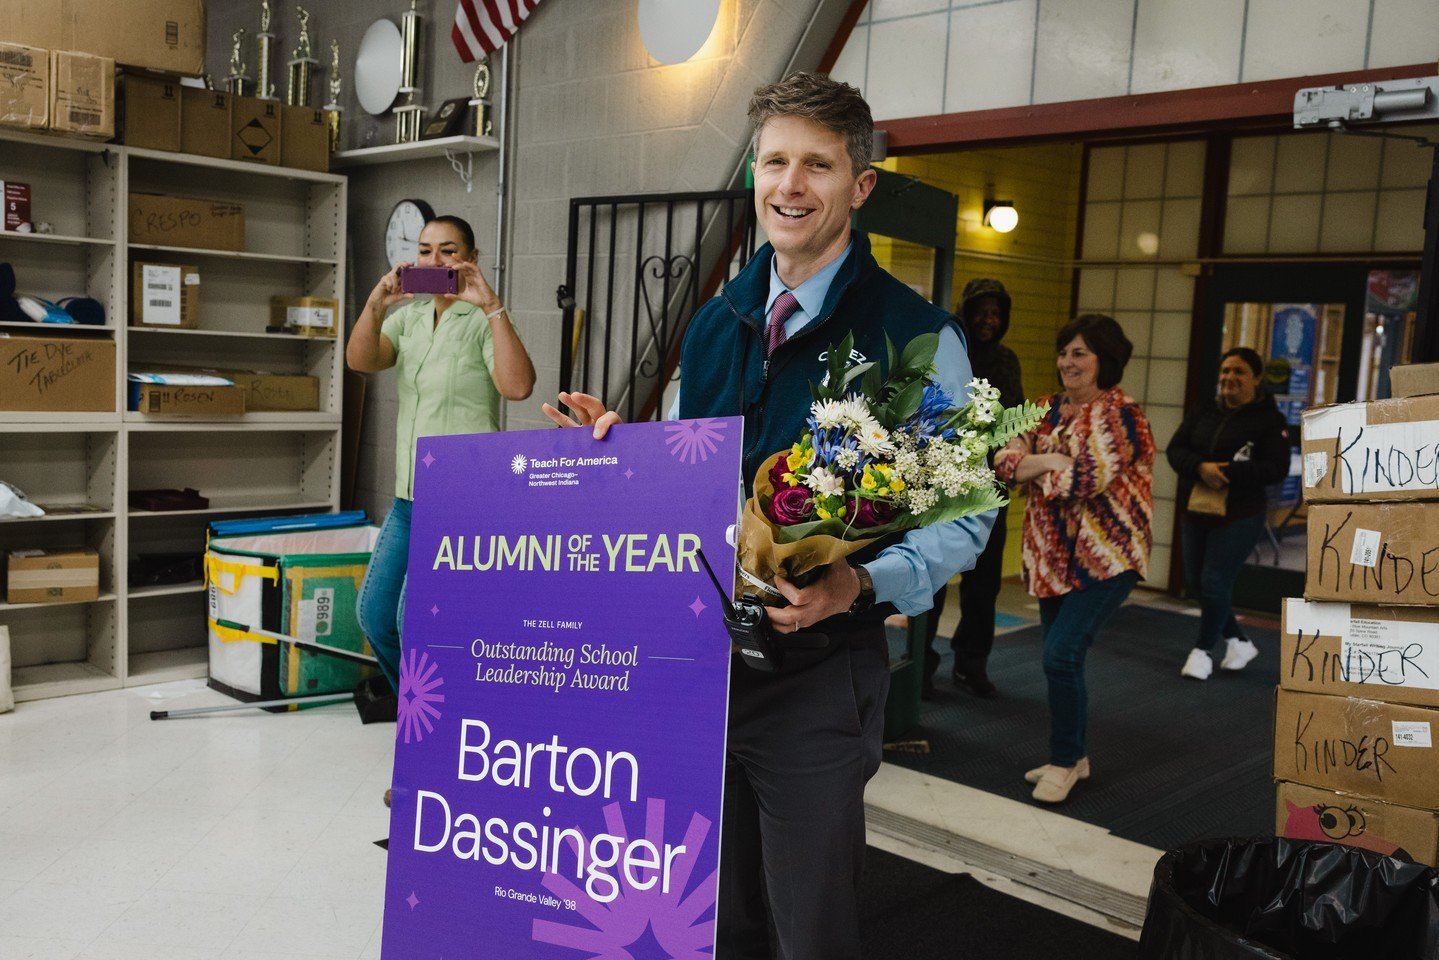 Barton Dassinger ('98 Rio Grande Valley) is the winner of the Zell Family Alumni of the Year Award, which honors outstanding school leadership. For 14 years, he has served as the principal of Cesar E Ch&aacute;vez, a PK-8th grade open-enrollment neig